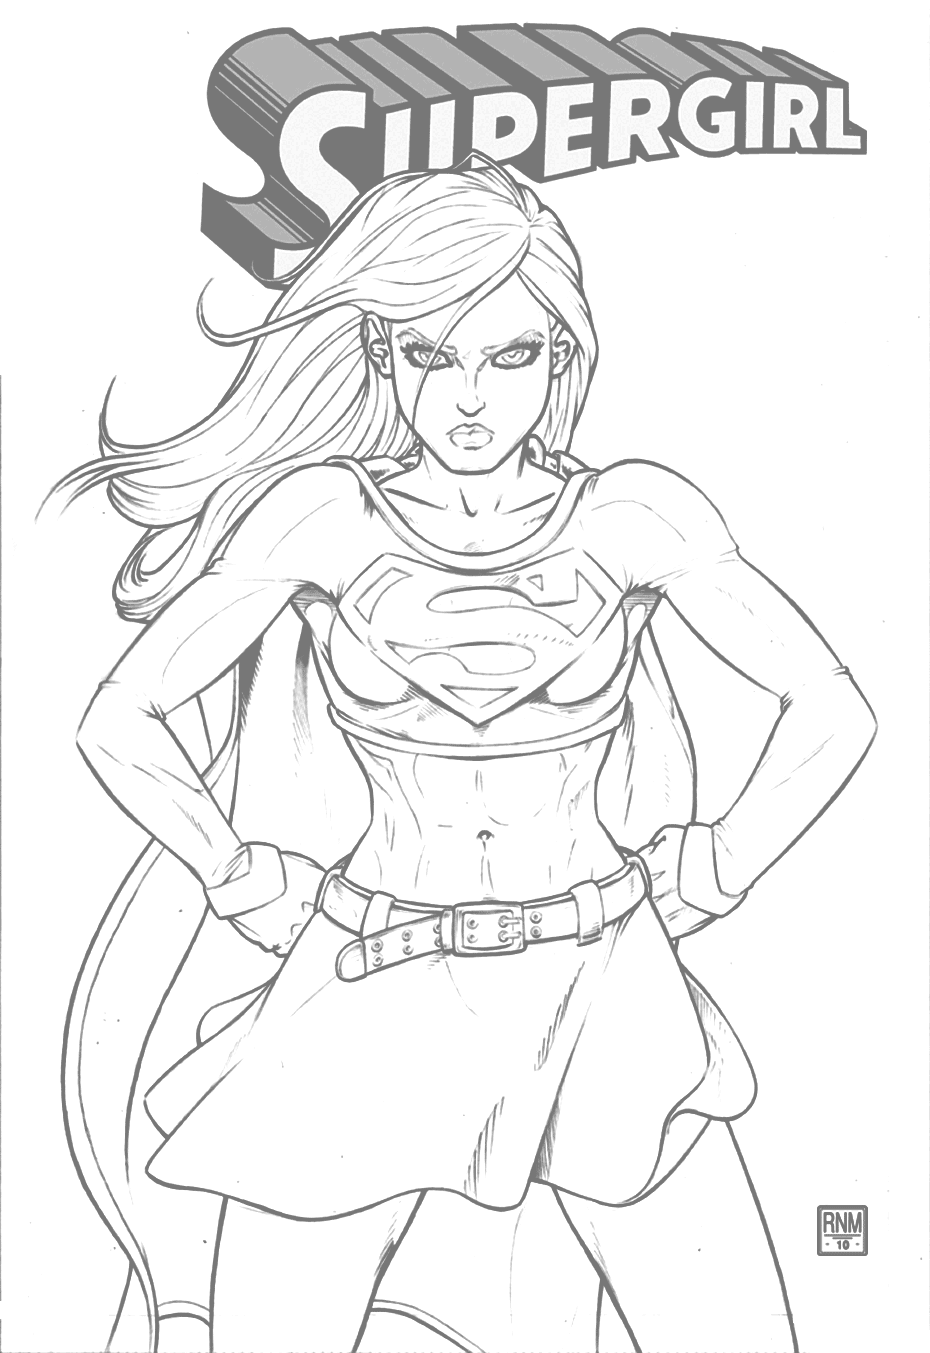 Cool Supergirl Traceable Art For Coloring